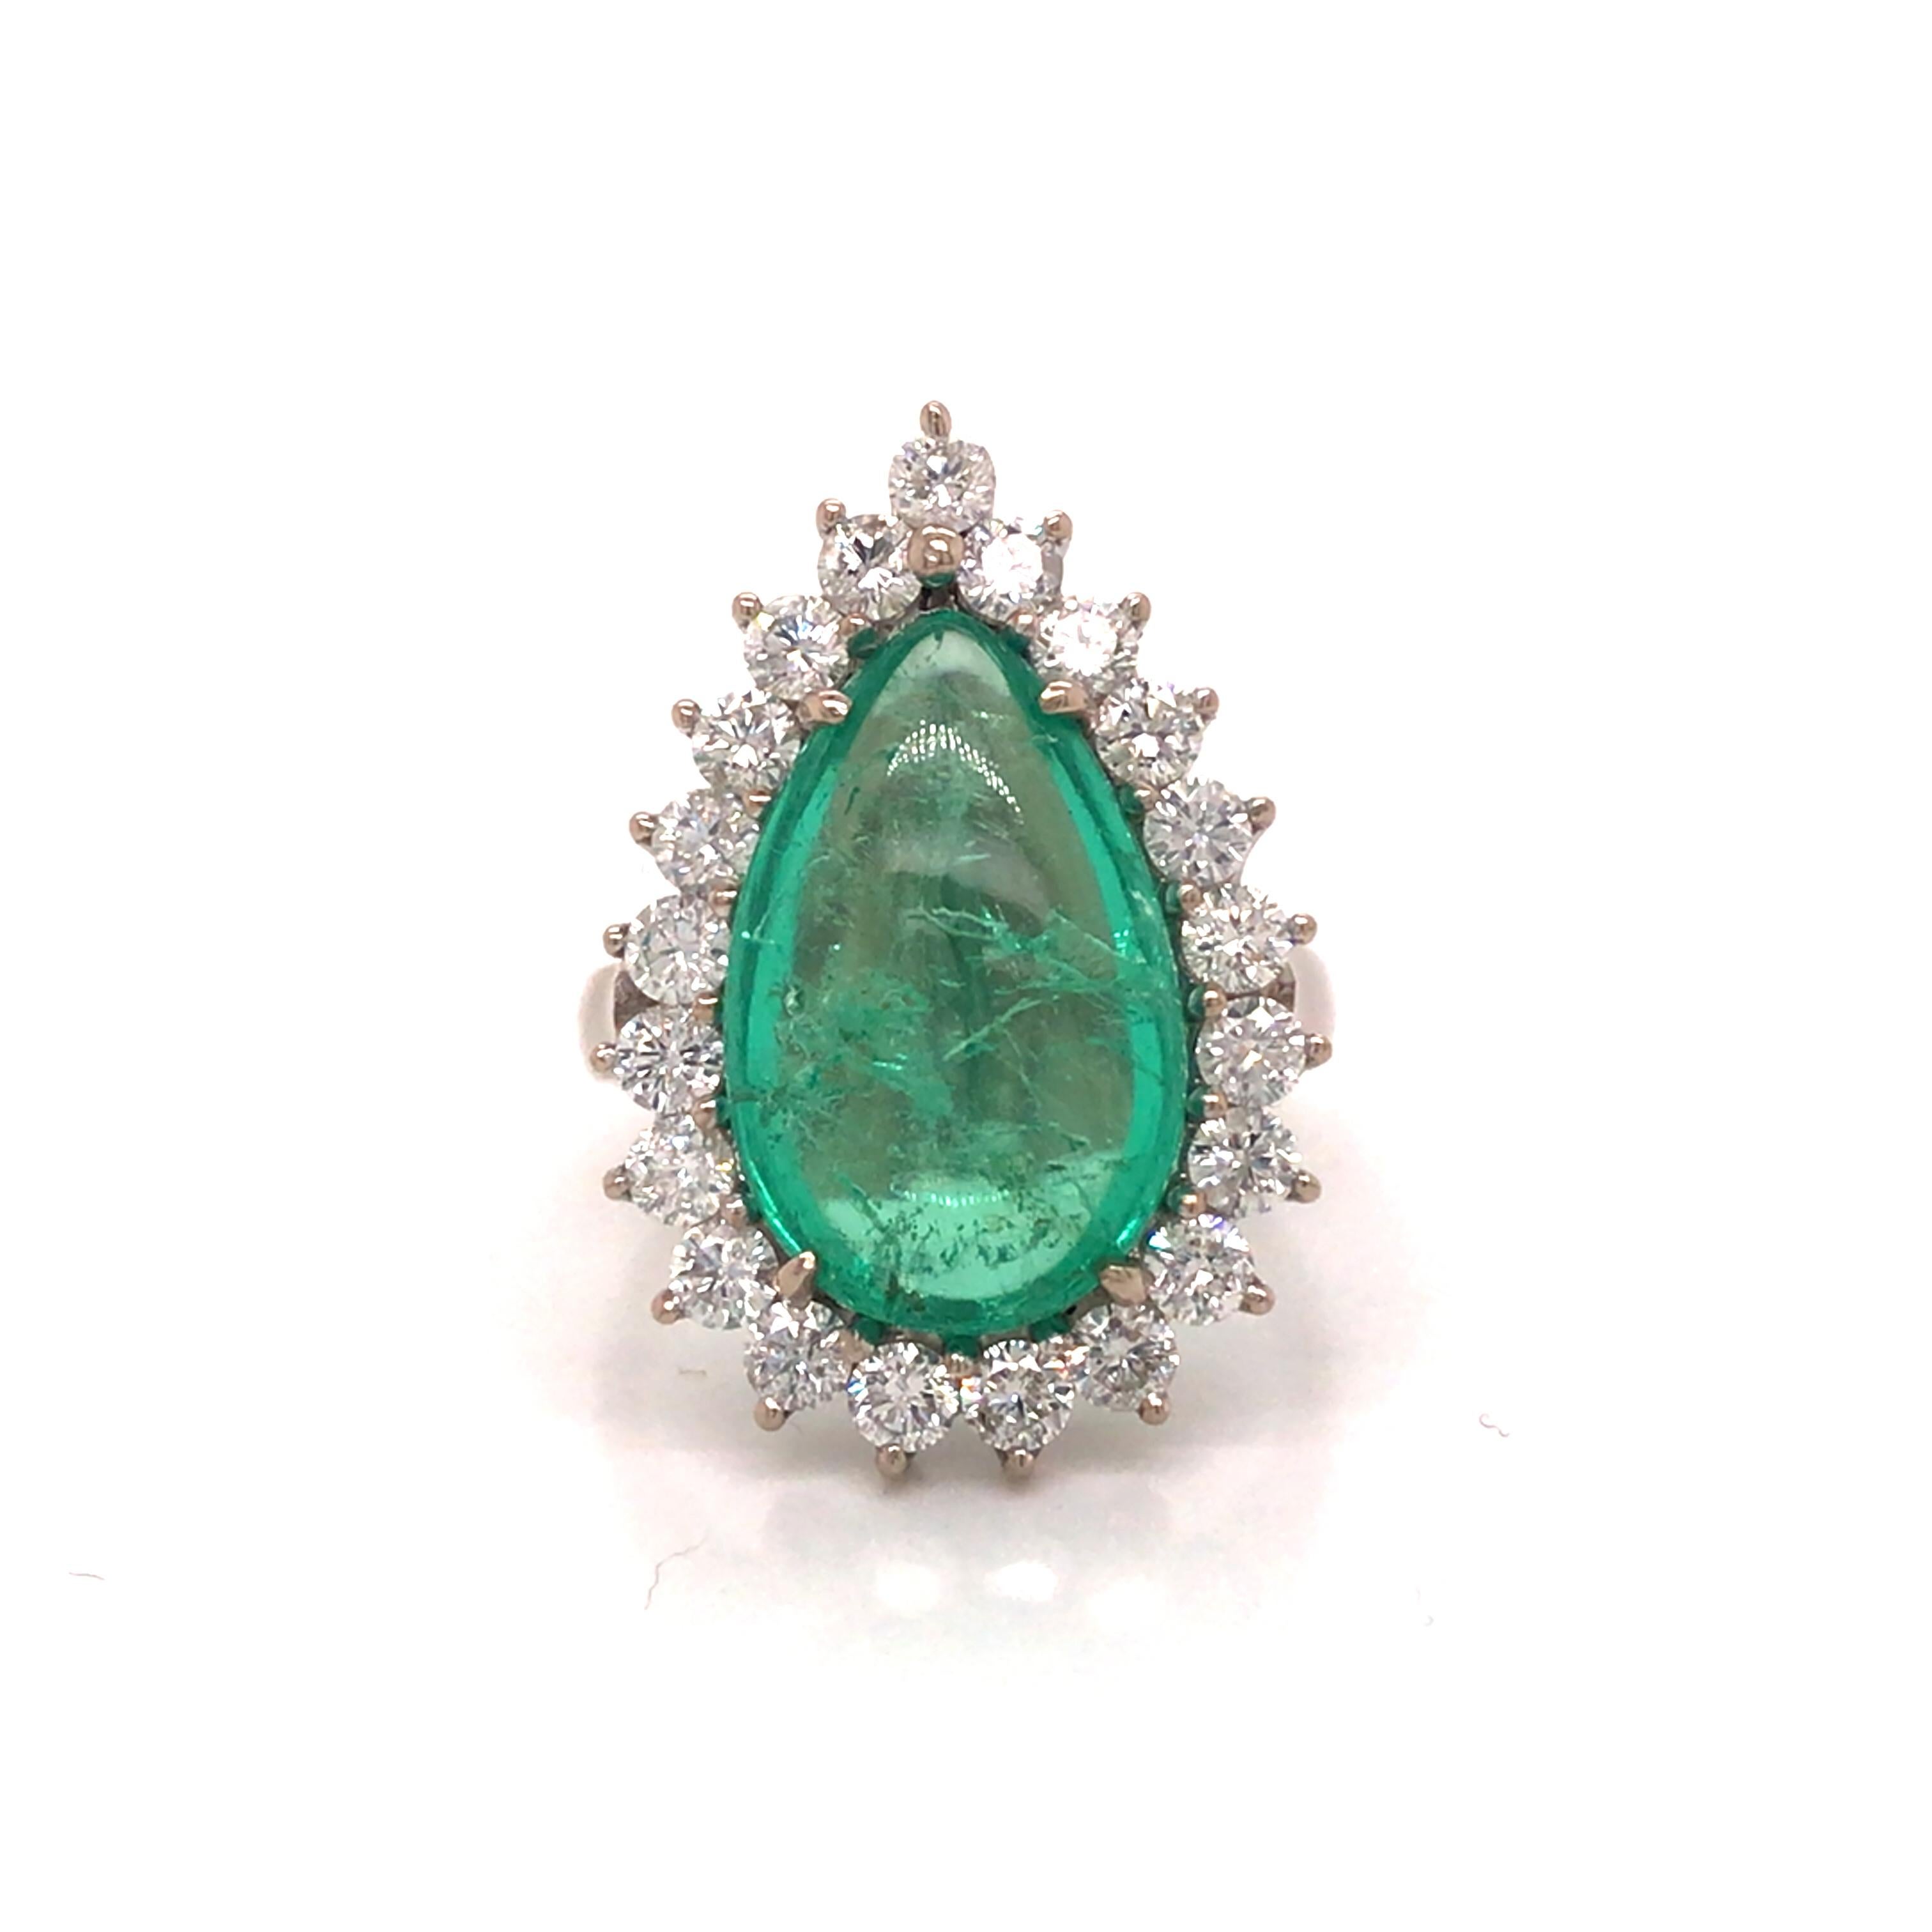 Green Emerald Diamond Halo Ring in 18K White Gold.  Round Brilliant Cut Diamonds weighing 1.54 carat total weight, G-H in color and VS-SI in color are expertly set in a Halo surrounding the 6.0 Carat Pear Shape Green Emerald Center.  The Ring